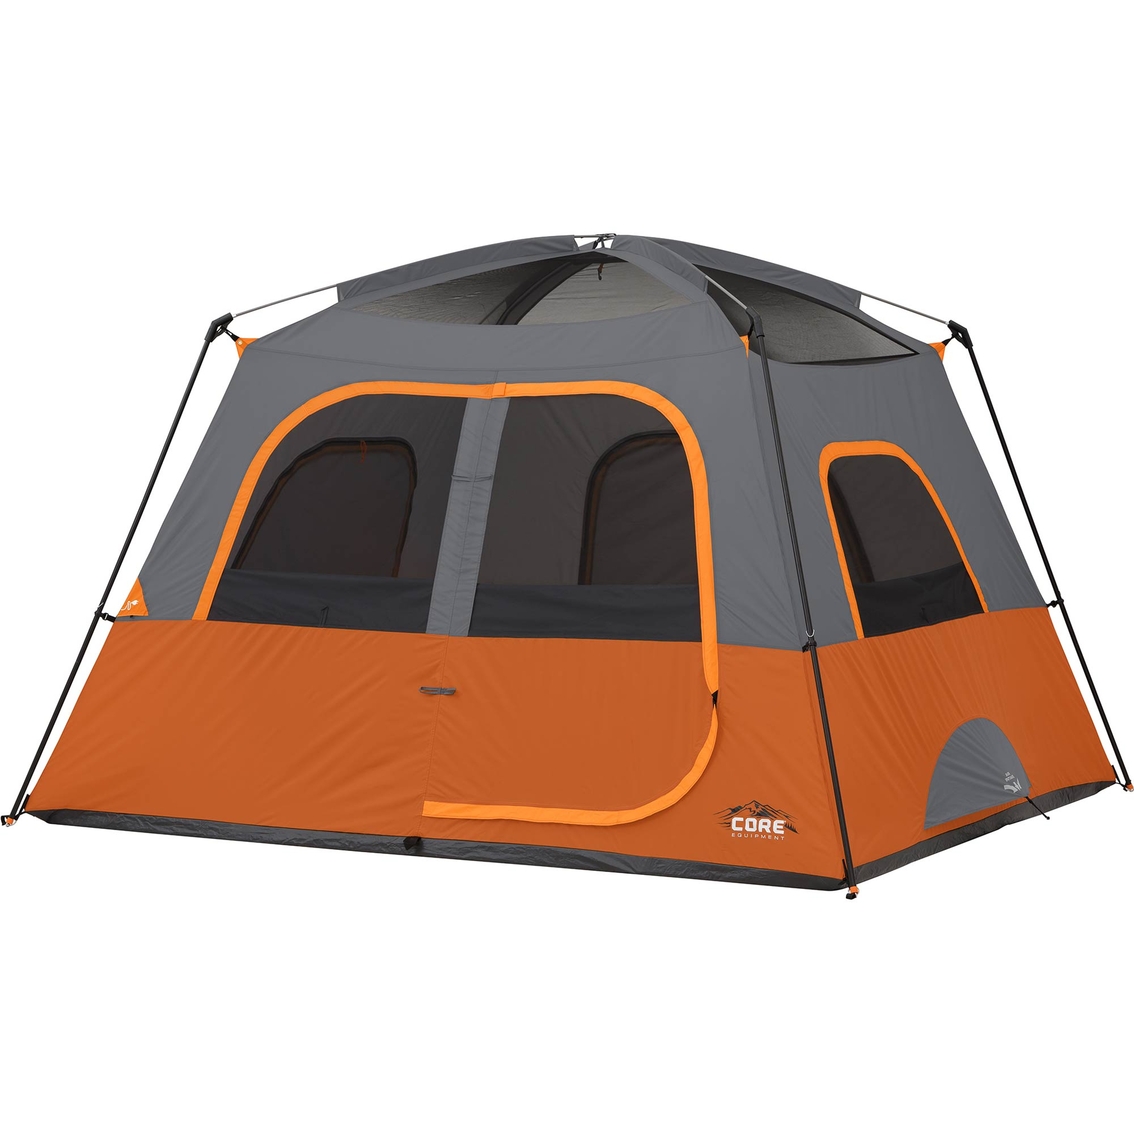 Core Equipment 6 Person Straight Wall Cabin Tent - Image 2 of 10